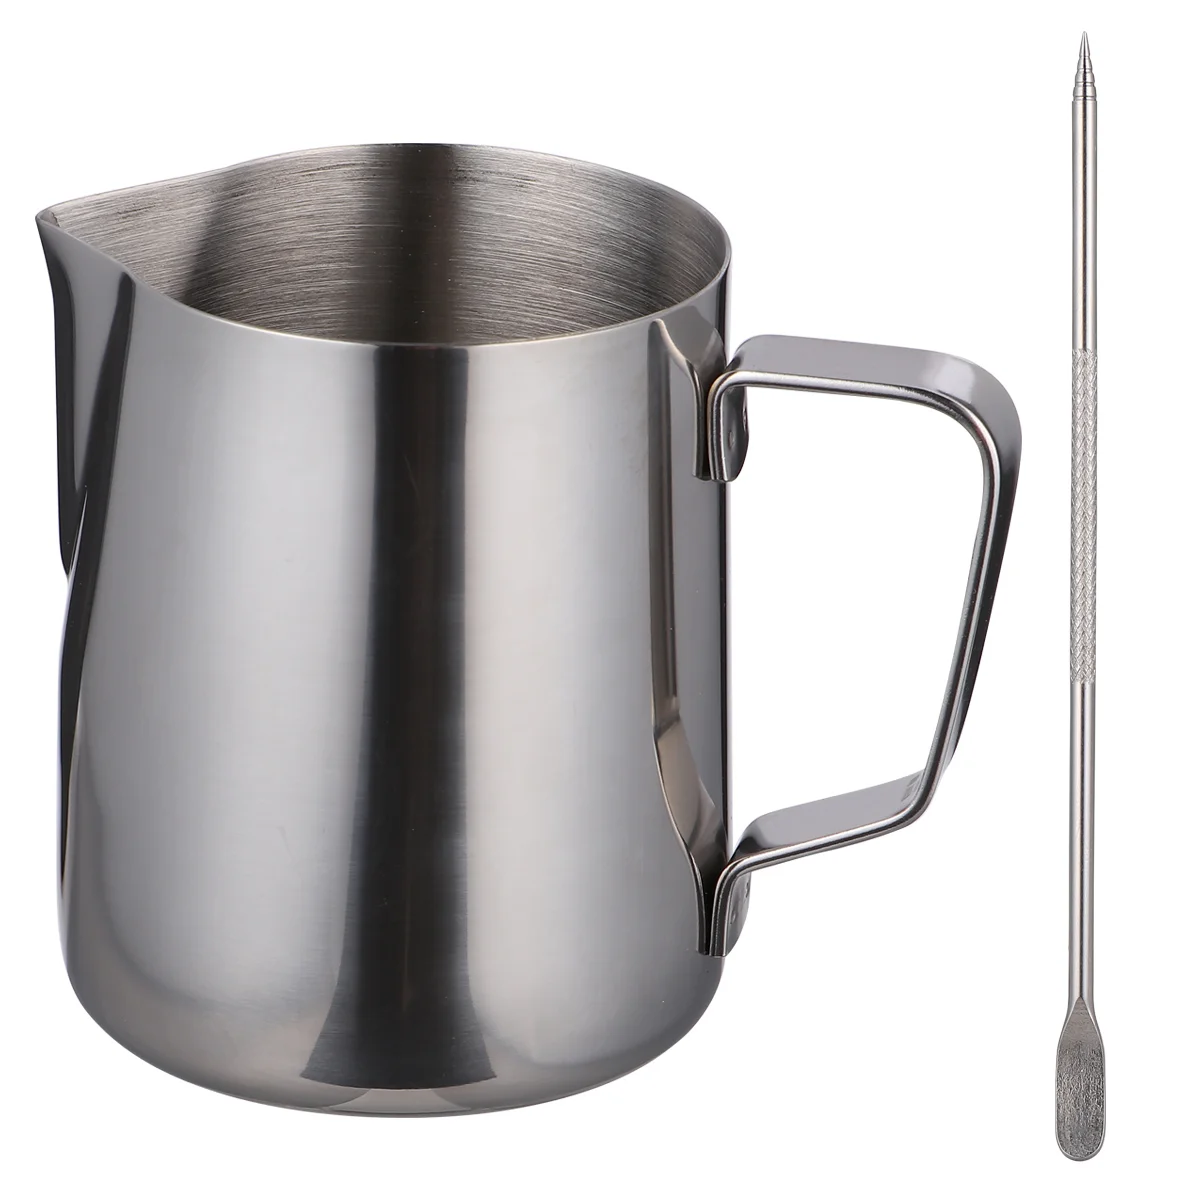 

Frothing Pitcher Stainless Steel Creamer Jug Steaming Pitcher with Latte Pen for Espresso Latte Chai Cappuccino Hot Chocolate